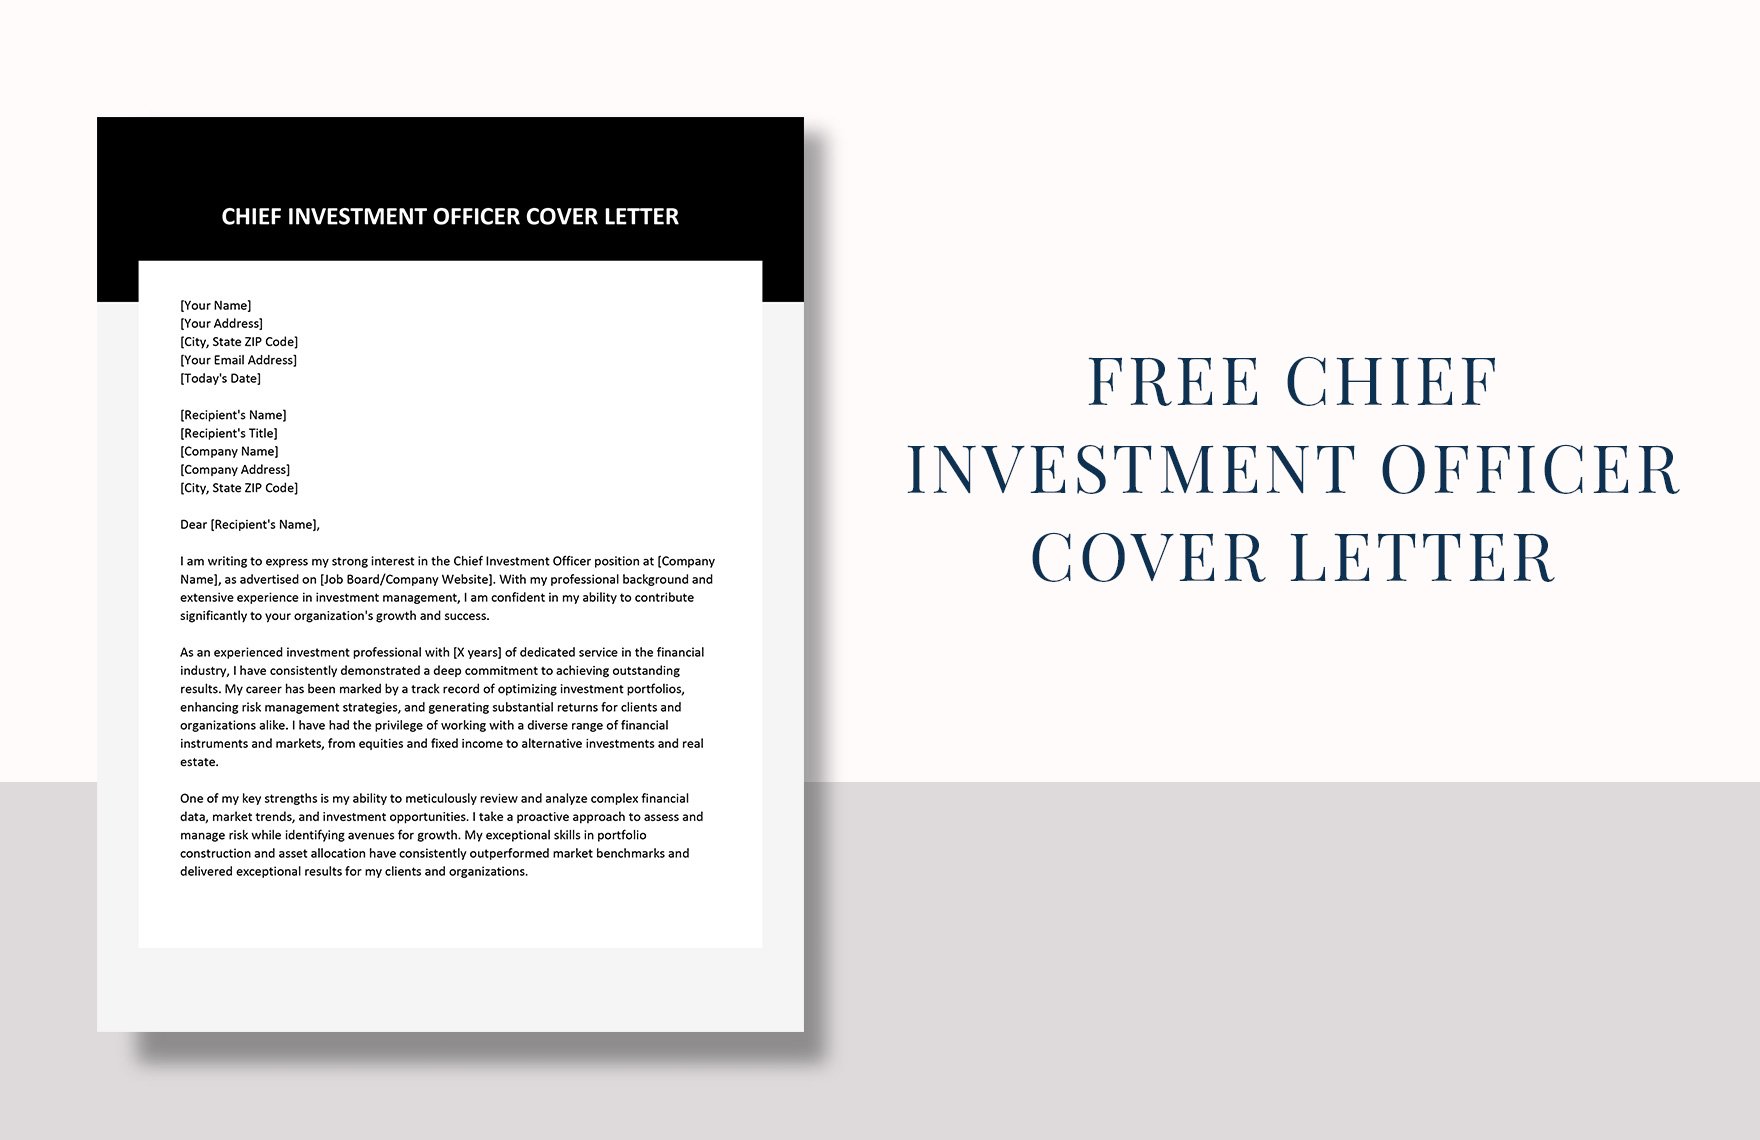 Chief Investment Officer Cover Letter